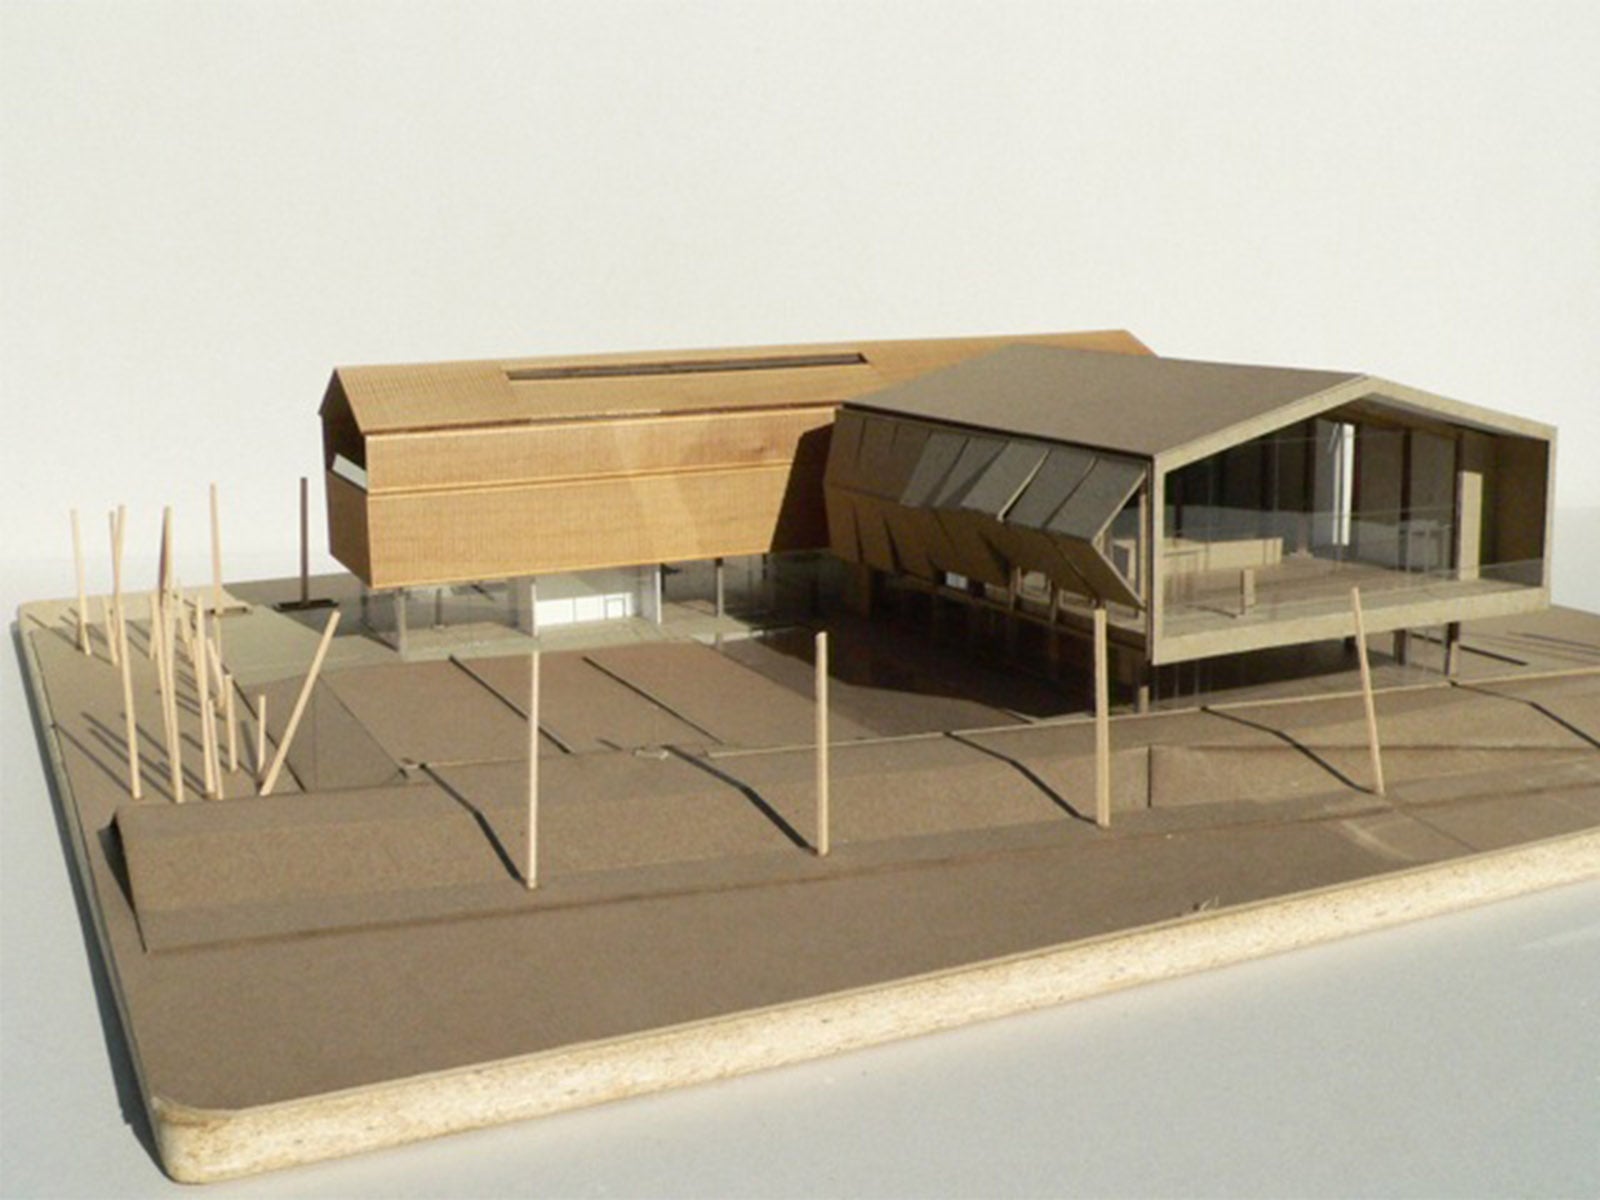 A photograph of the physical wood model.